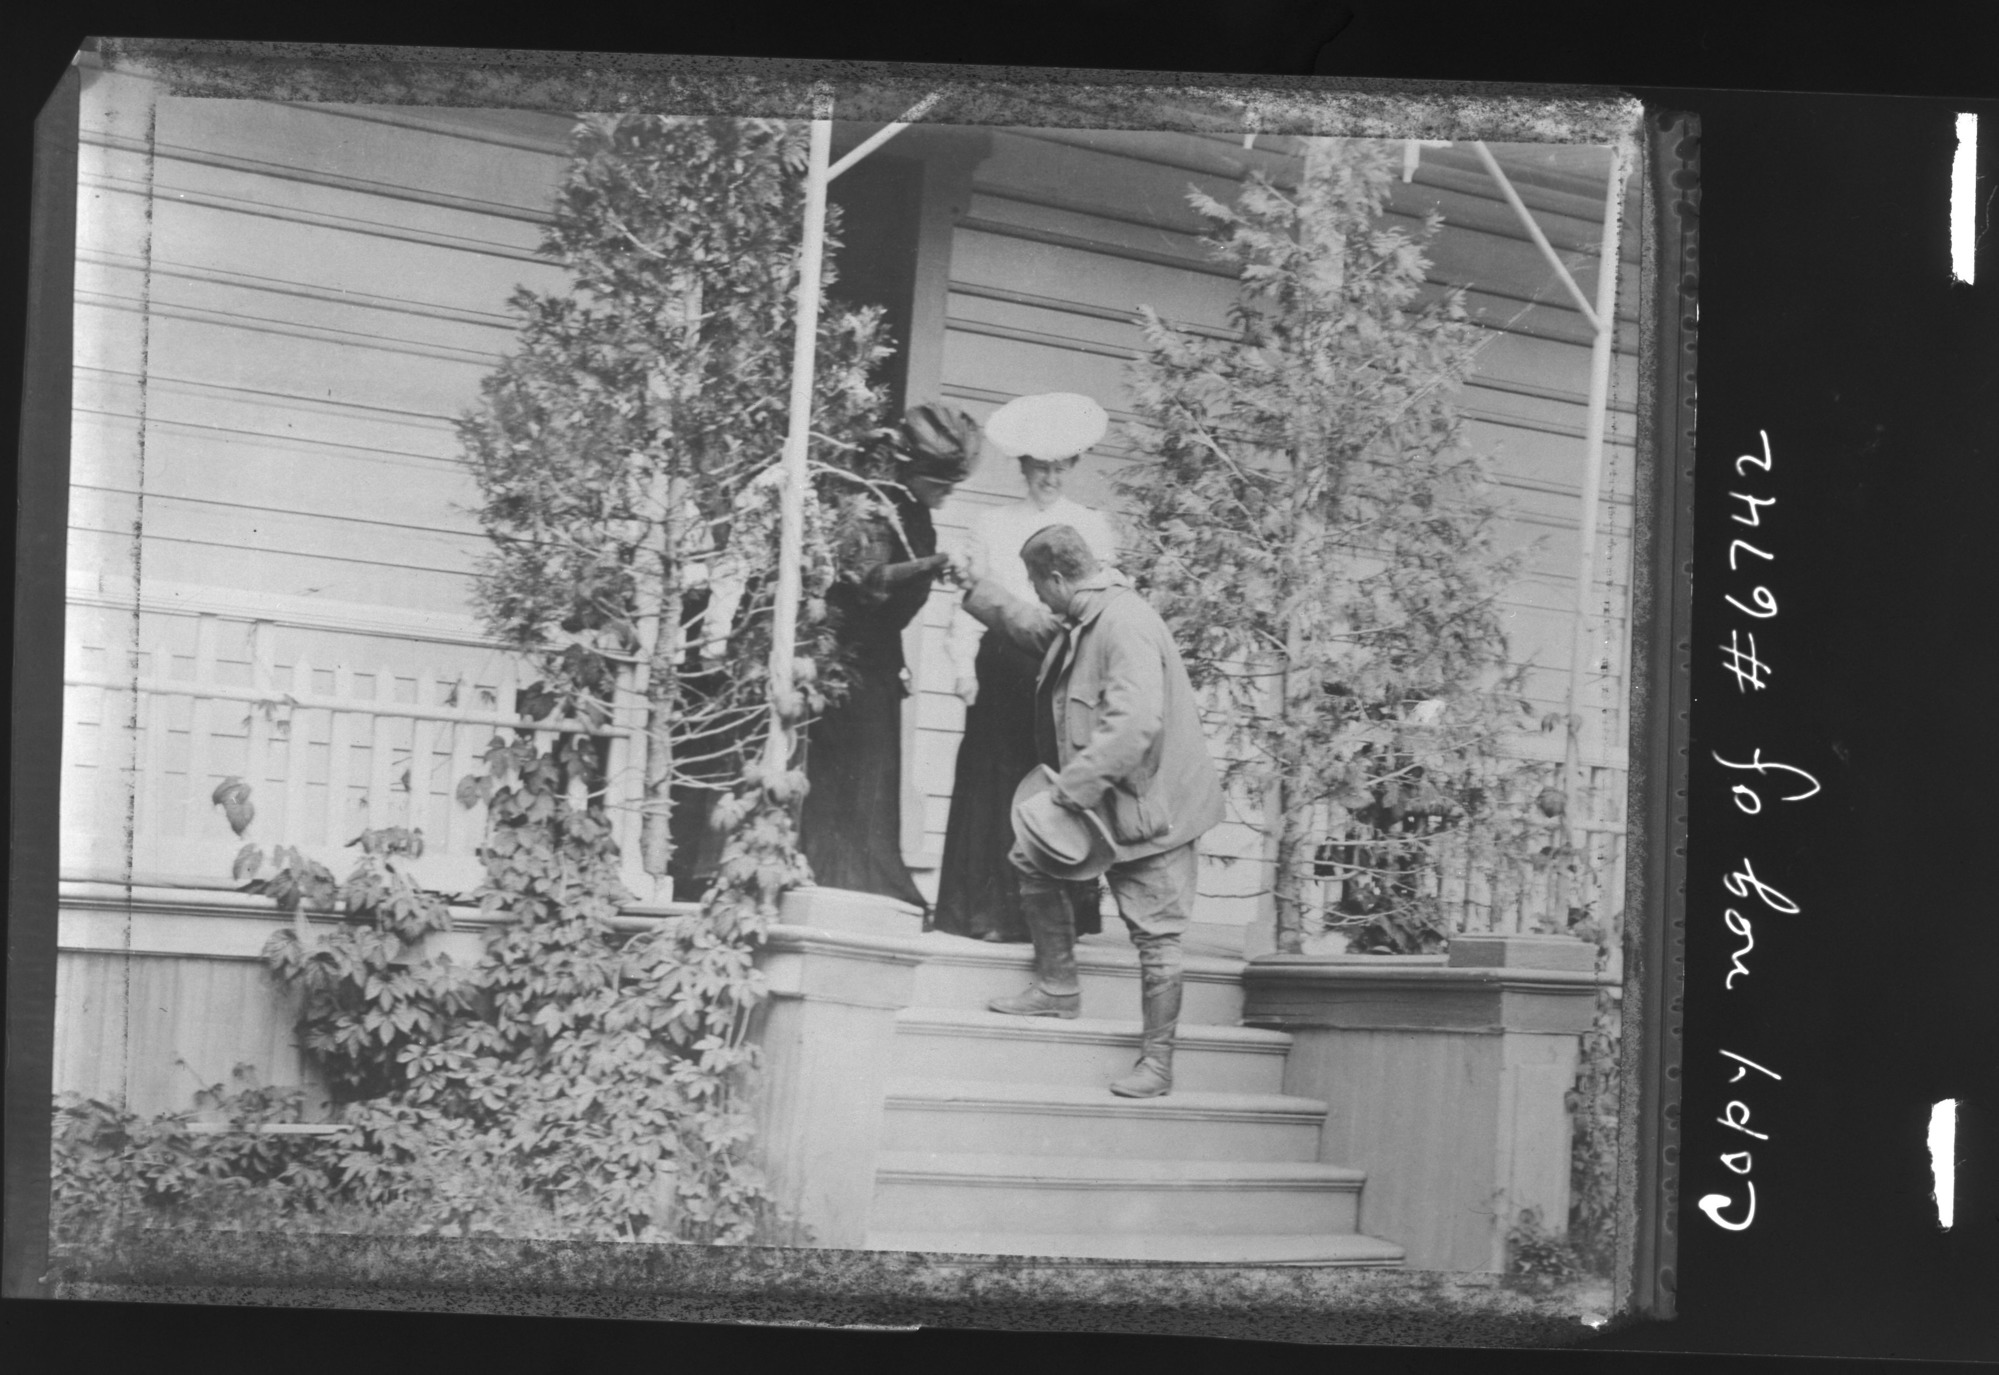 Willeta Hill & Estella Washburn bidding Pres. Theodore Roosevelt goodbye after he visited the Thomas Hill studio. Copy neg. of Yosemite Collections #6742. Also in Shirley Sargent's Wawona book, p. 57.